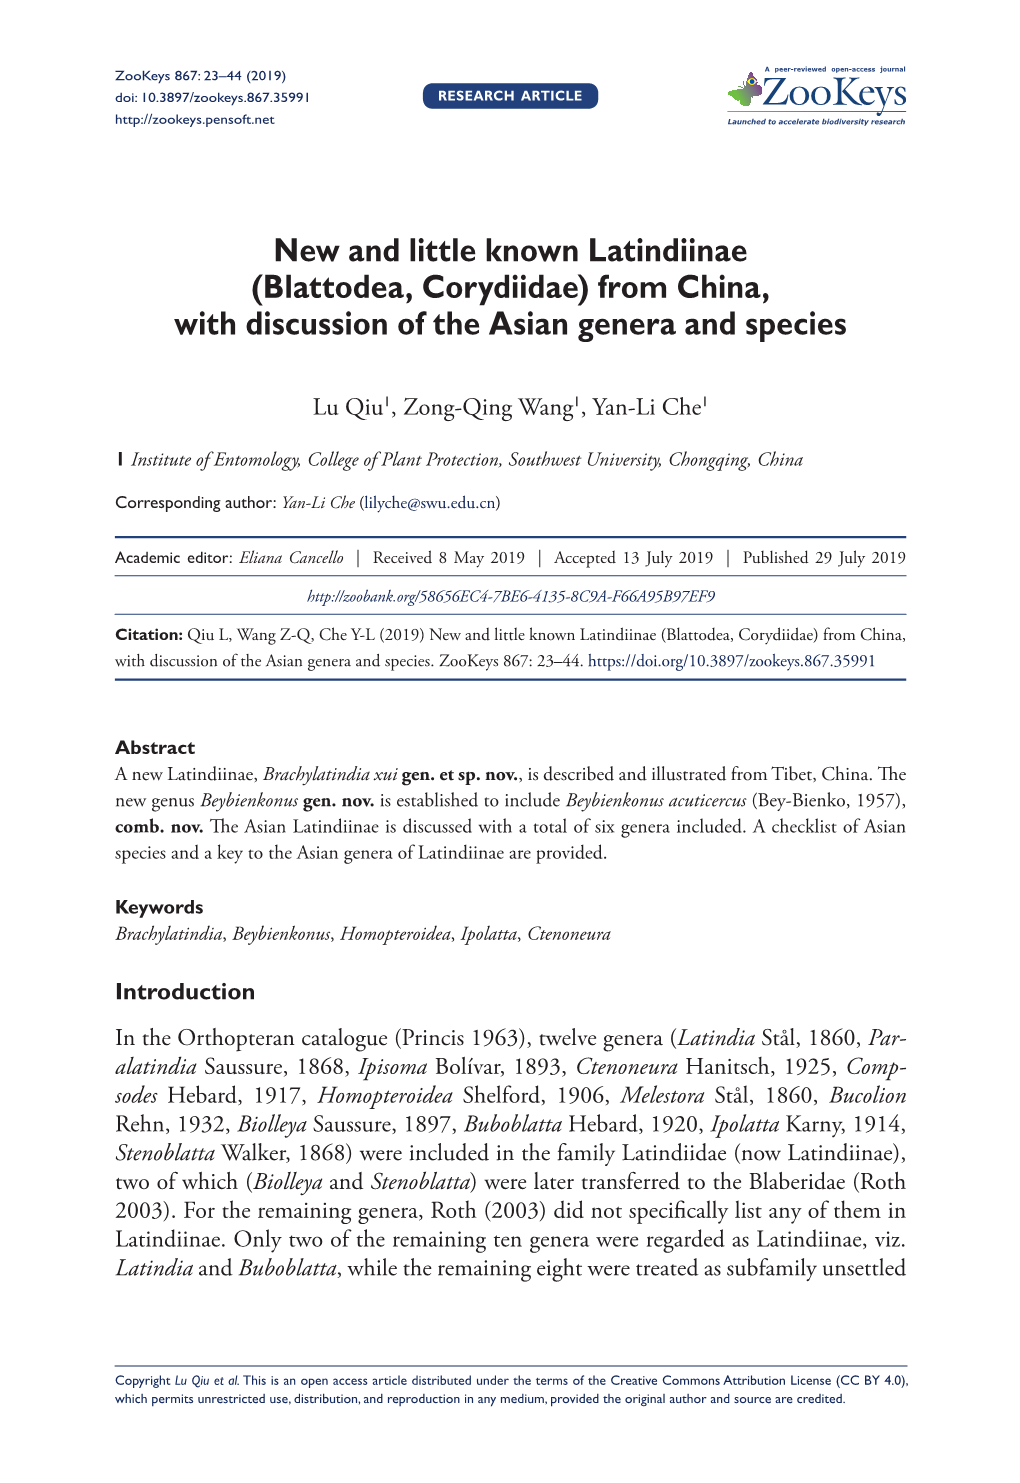 Blattodea, Corydiidae) from China, with Discussion of the Asian Genera and Species